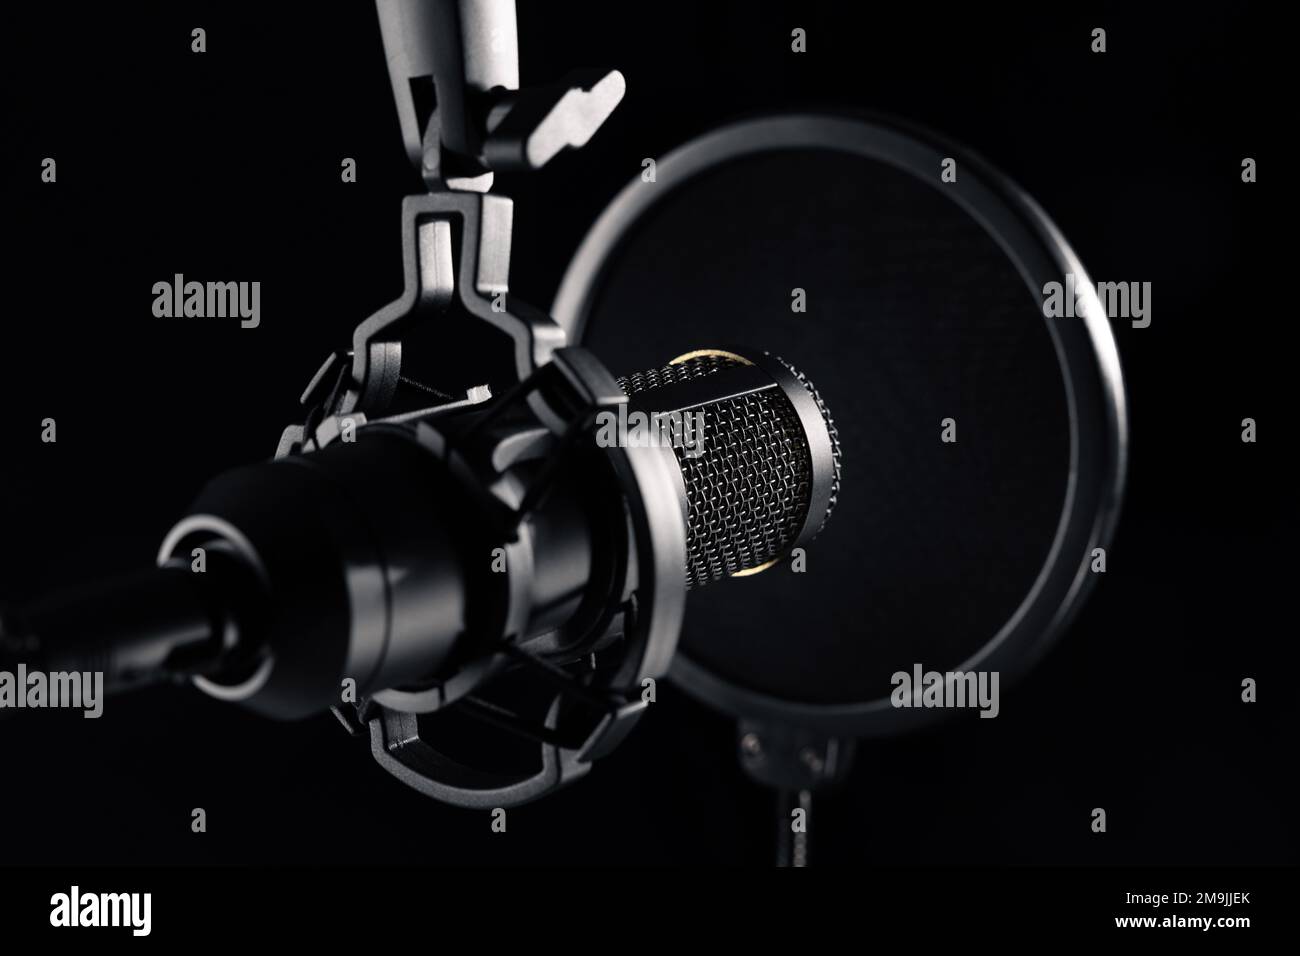 podcast sound recording microphone on black background Stock Photo